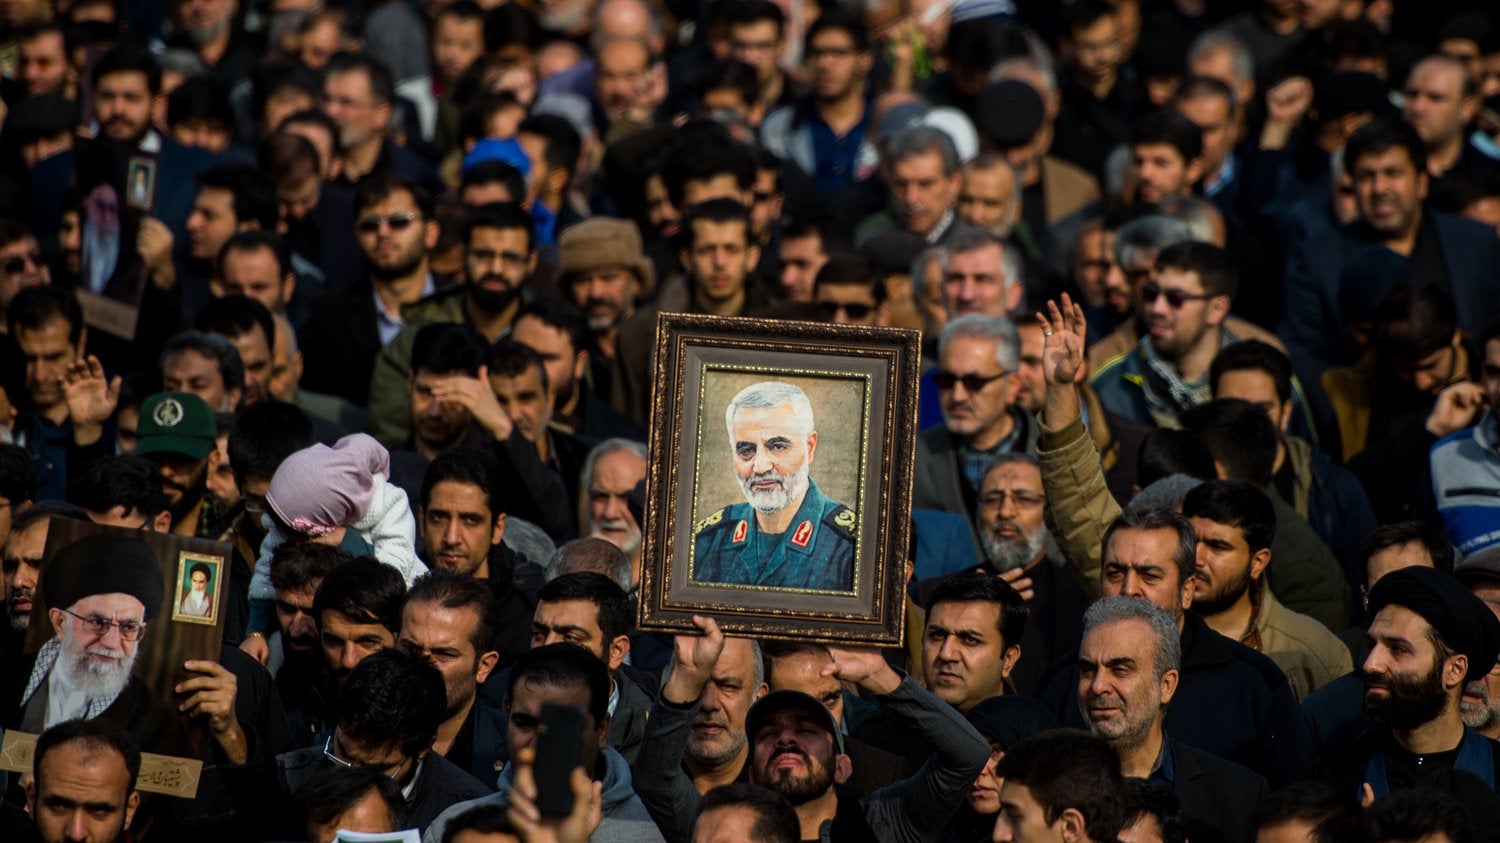 Demonstrators hold up an image of Qassem Soleimani following his death